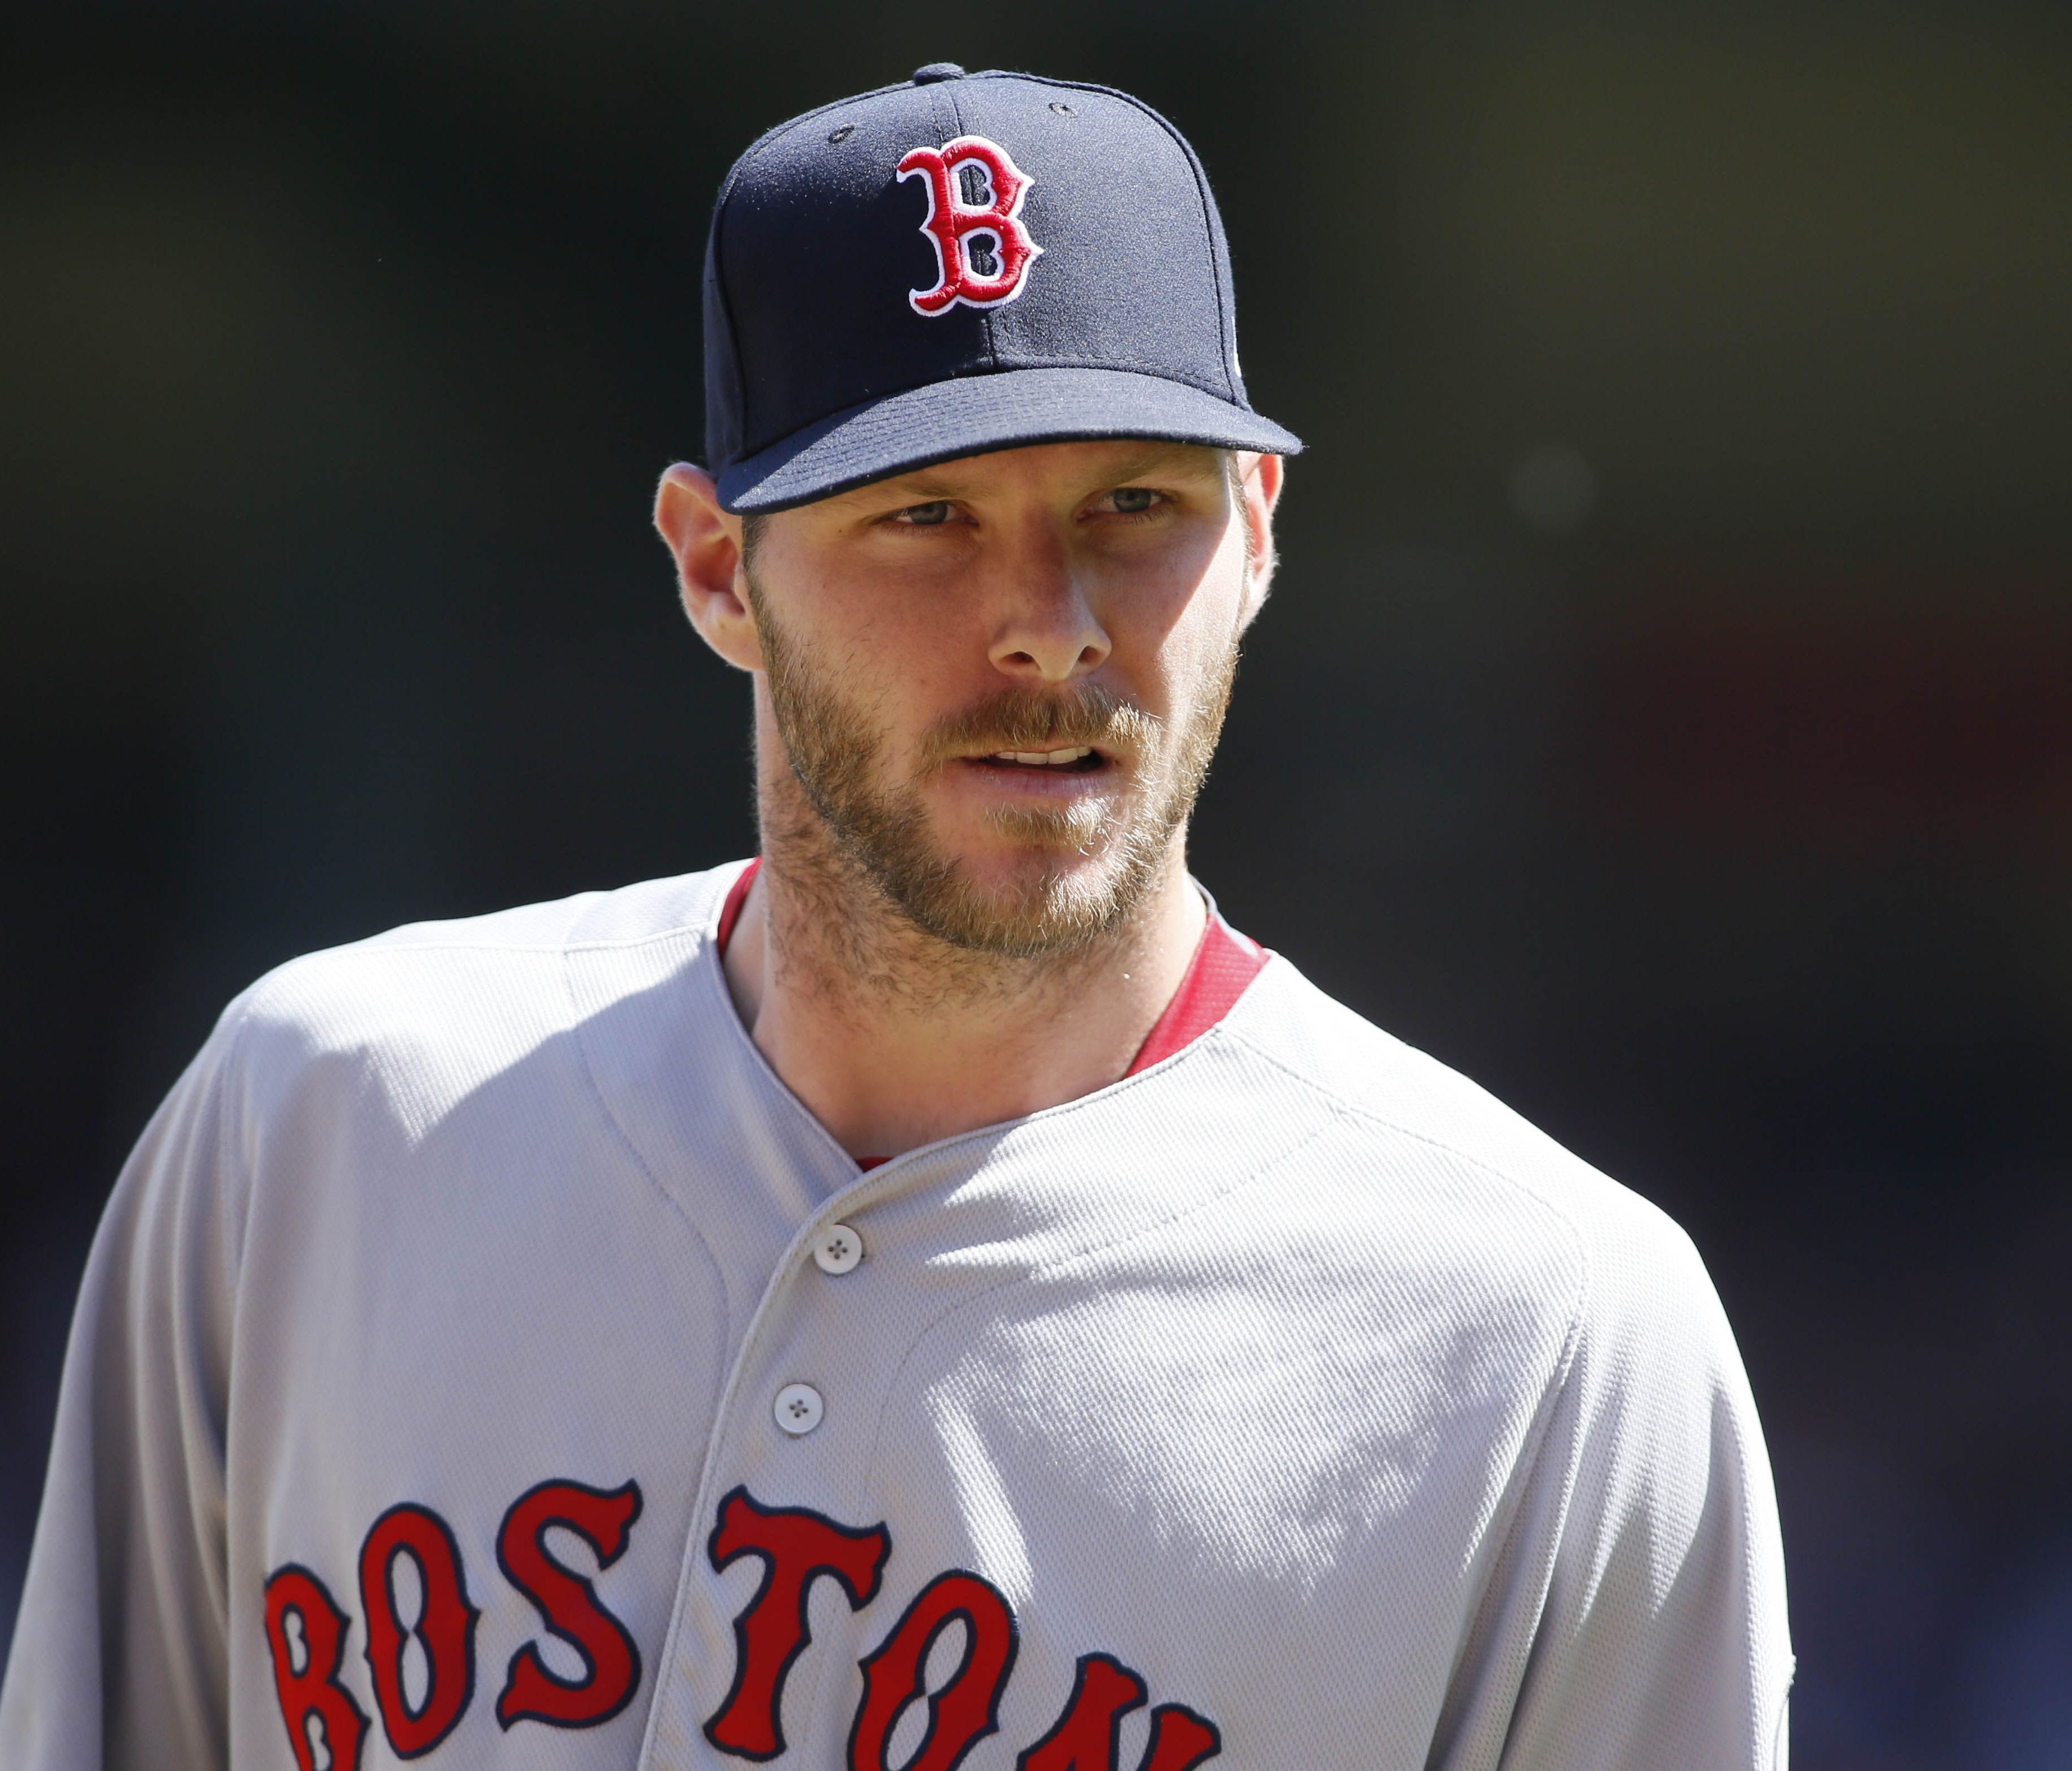 Chris Sale is 3-1 with the Red Sox this season.